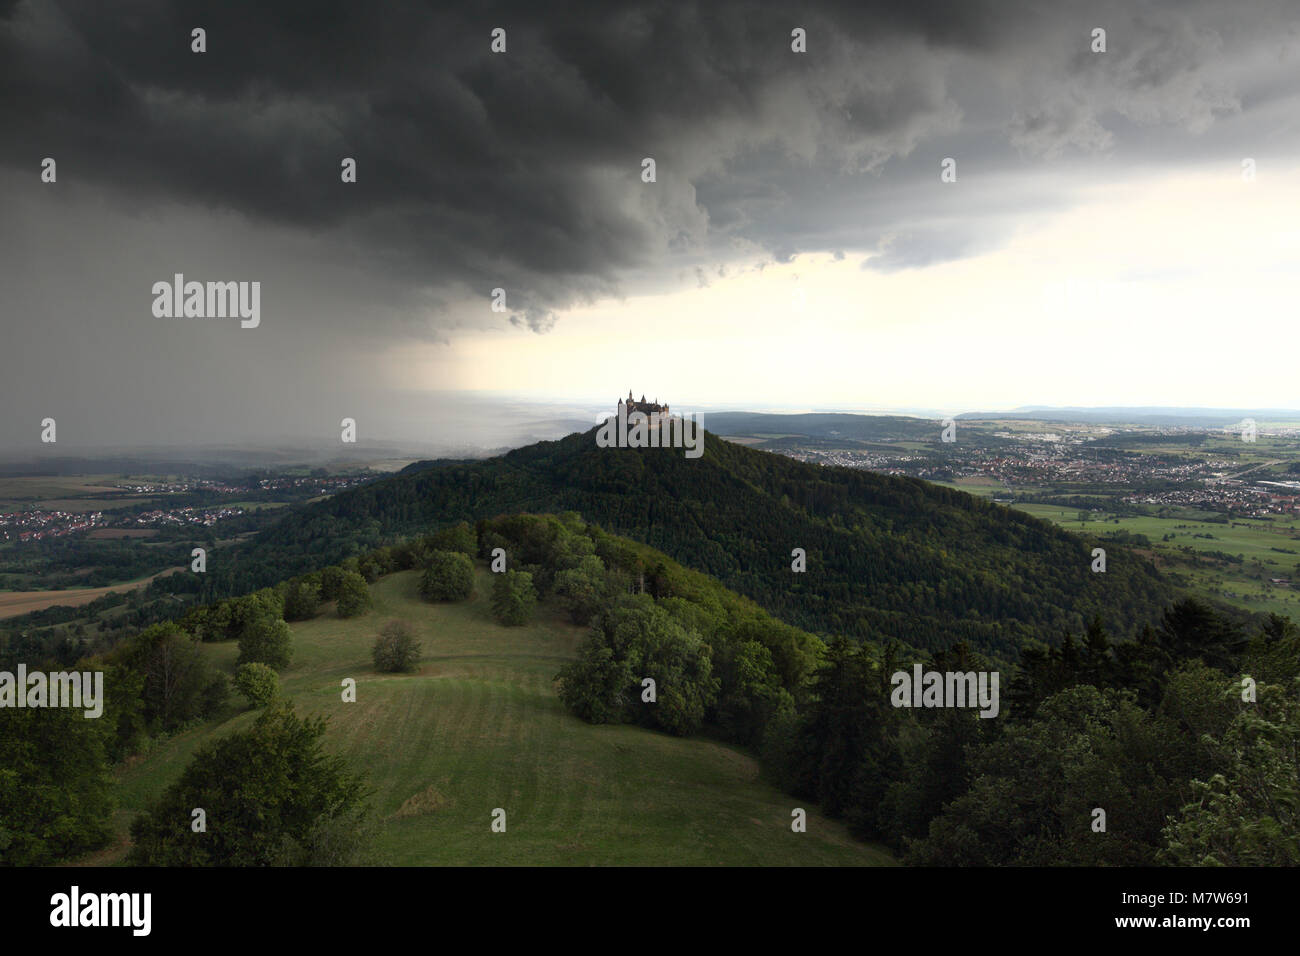 Thunder Storm Approaching Hohenzollern Castle in Germany Stock Photo